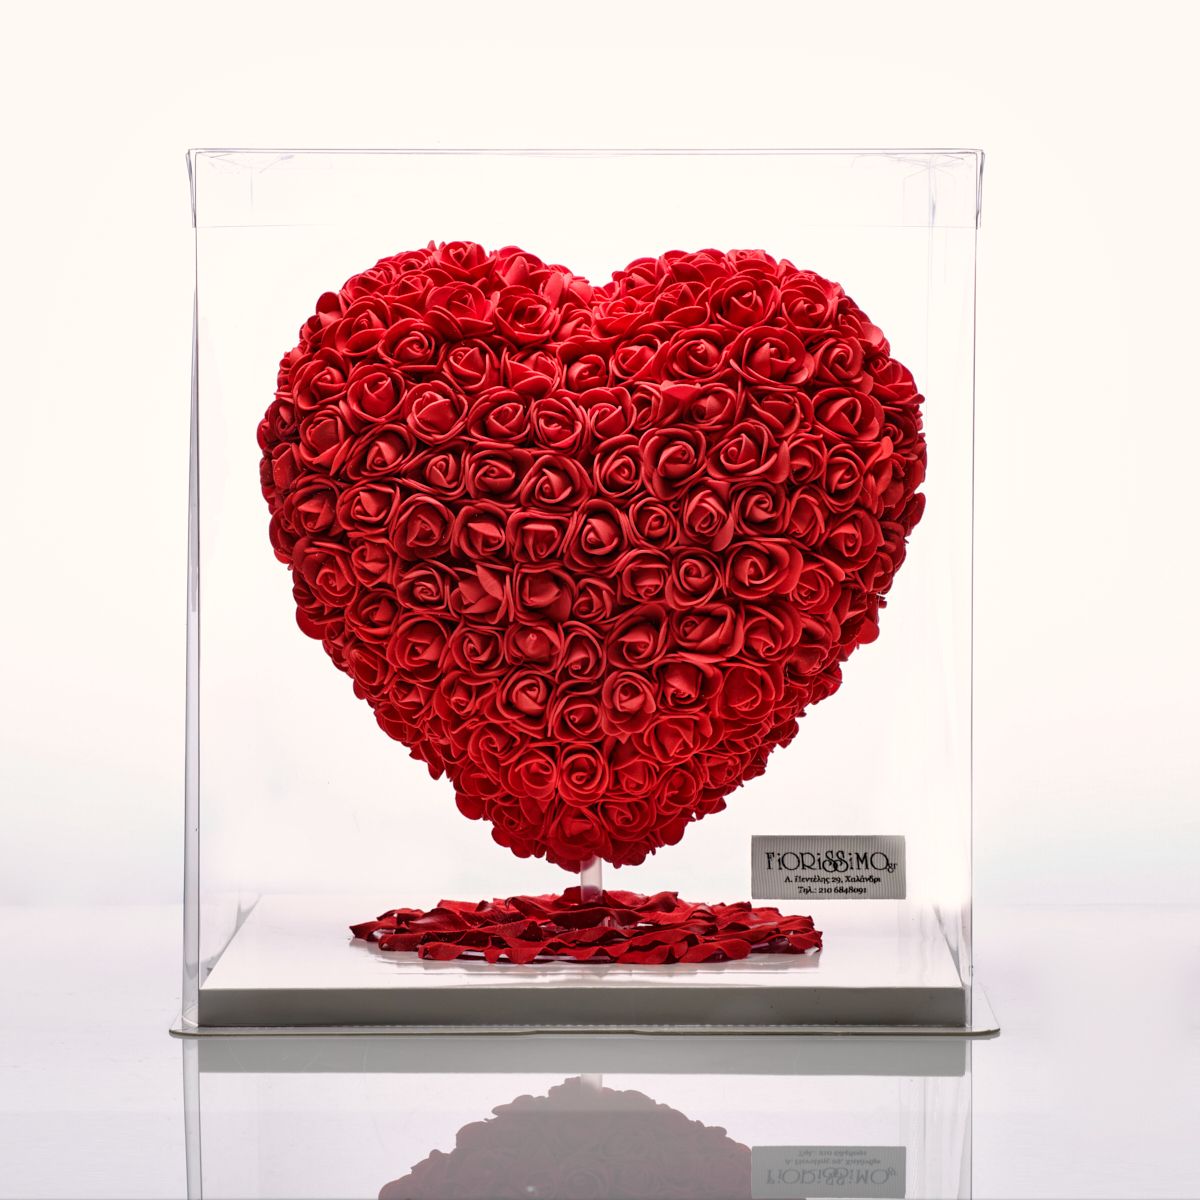 Heart from latex (artificial) red roses!